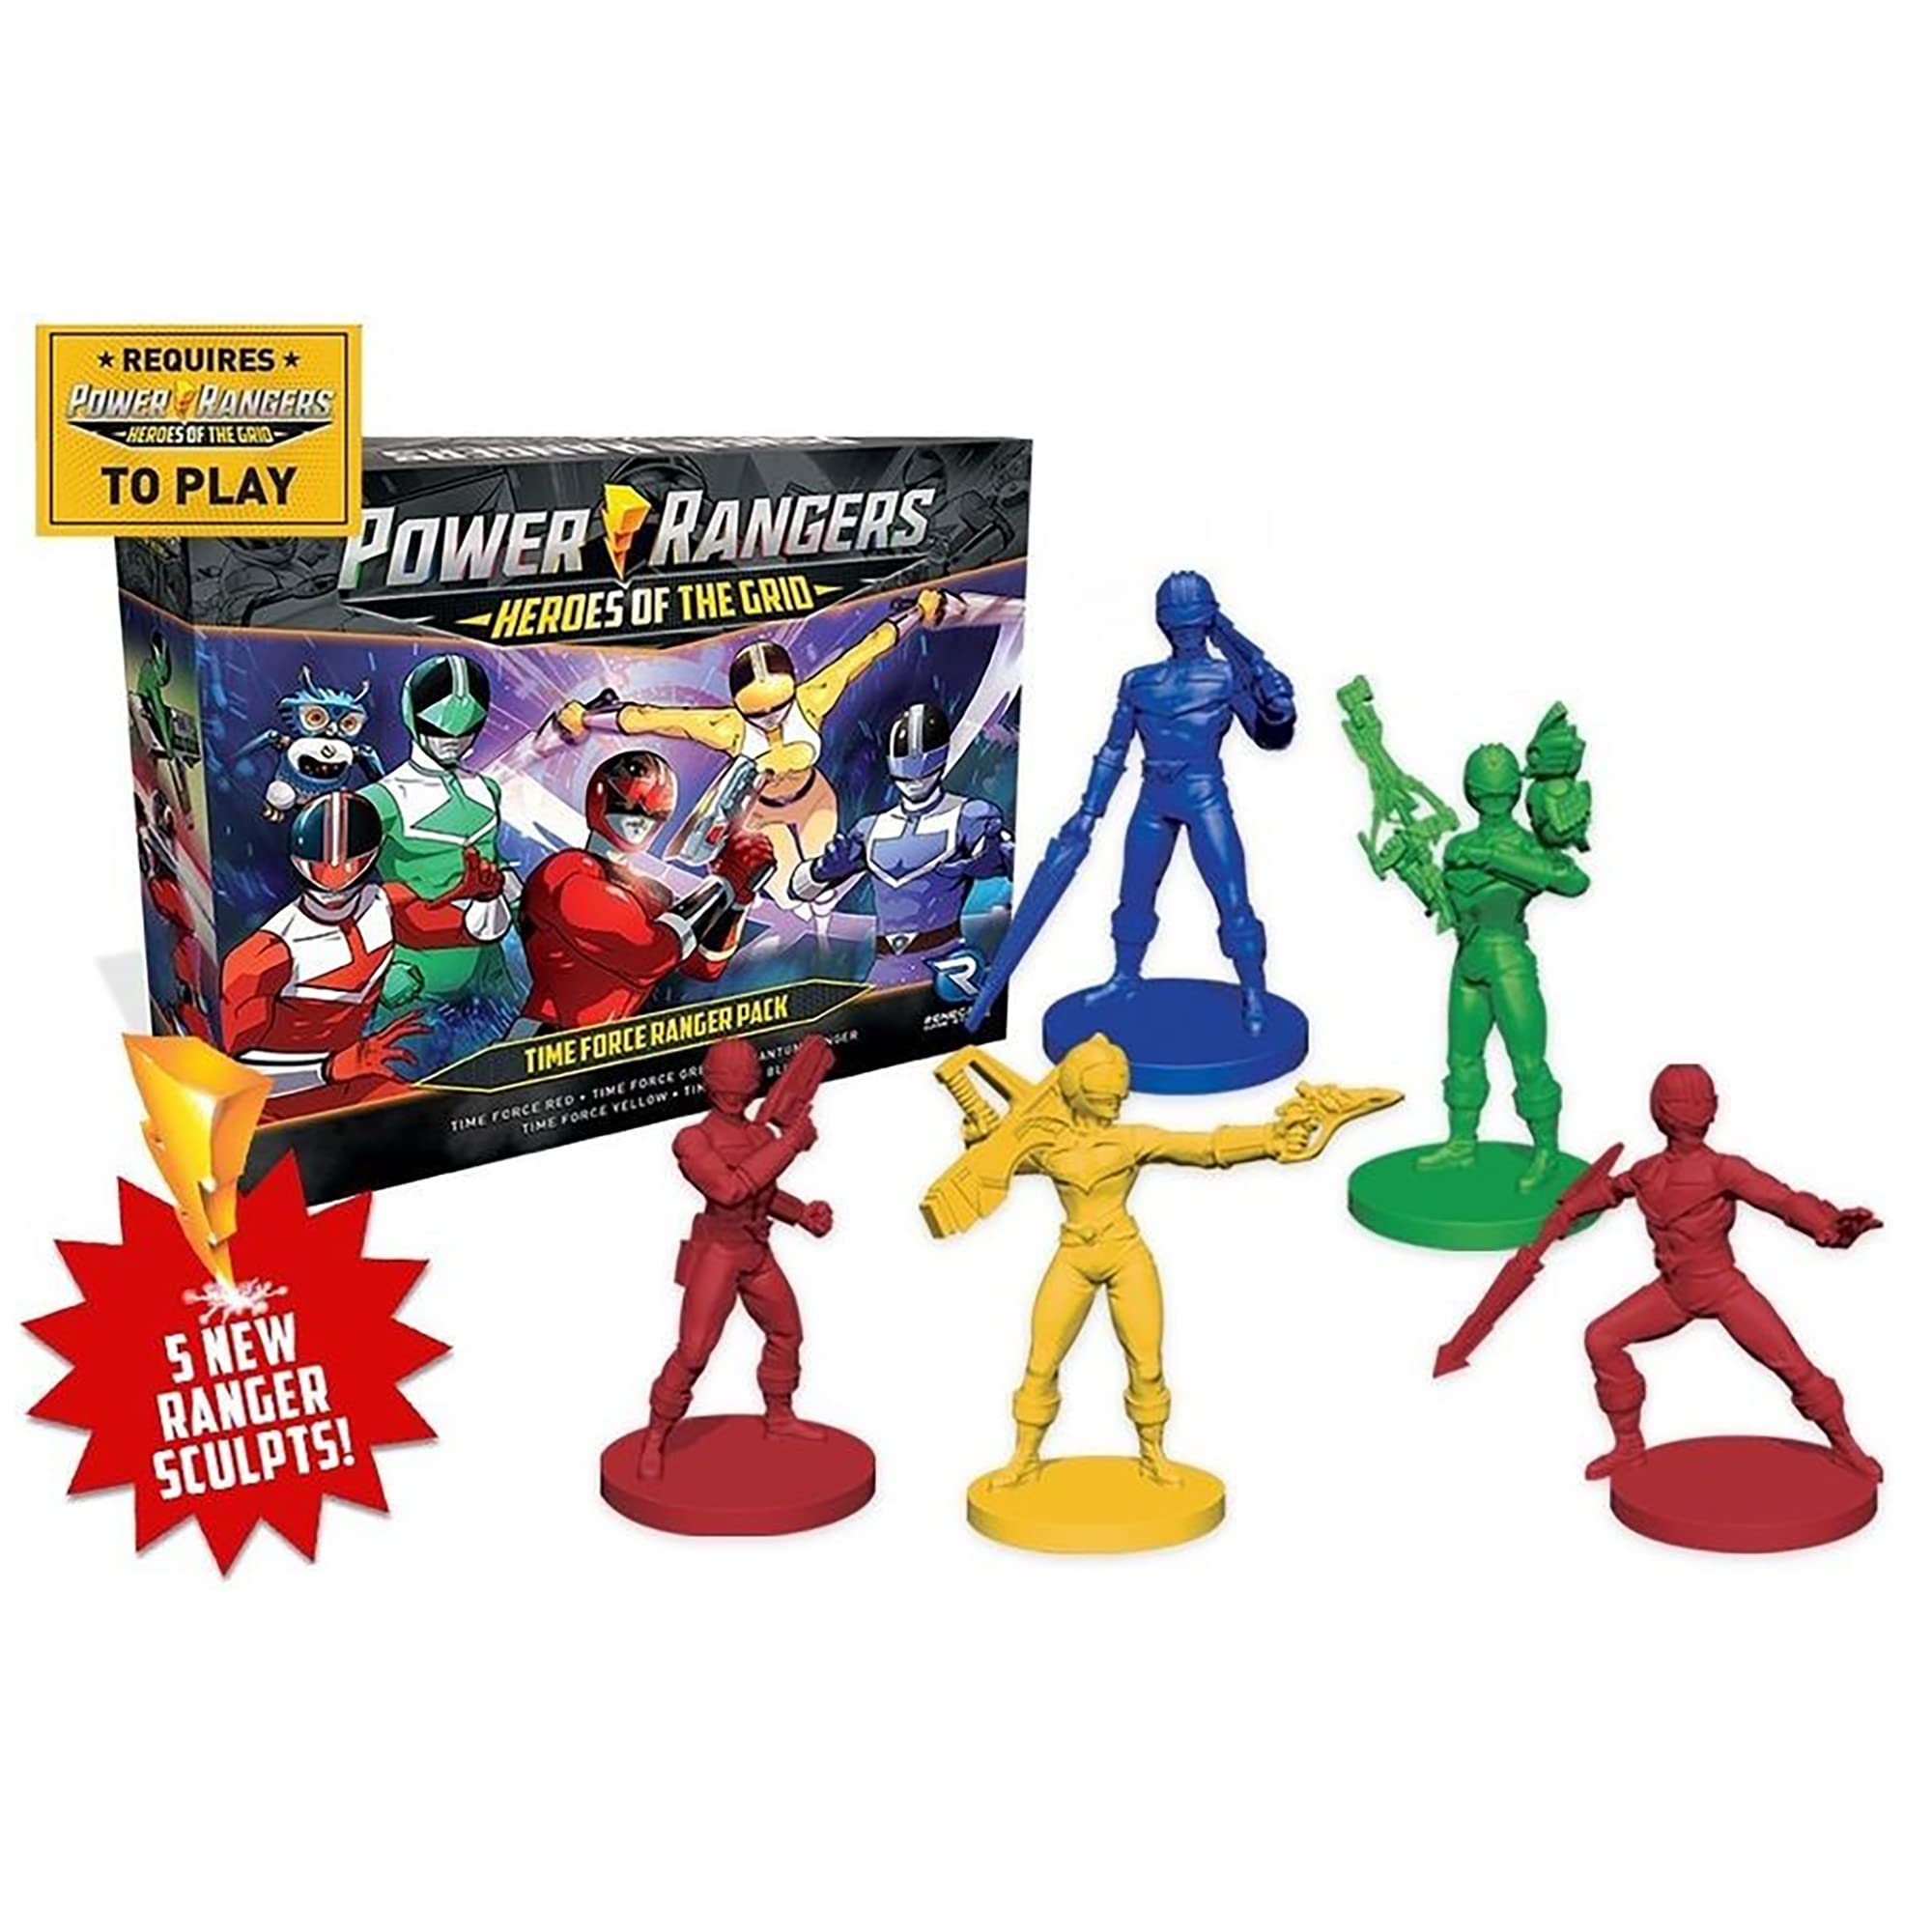 Power Rangers Heroes of The Grid: Time Force Ranger Pack - Expansion to Heroes of The Grid. 2-5 Players, Ages 14+, 45-60 Min Game Play